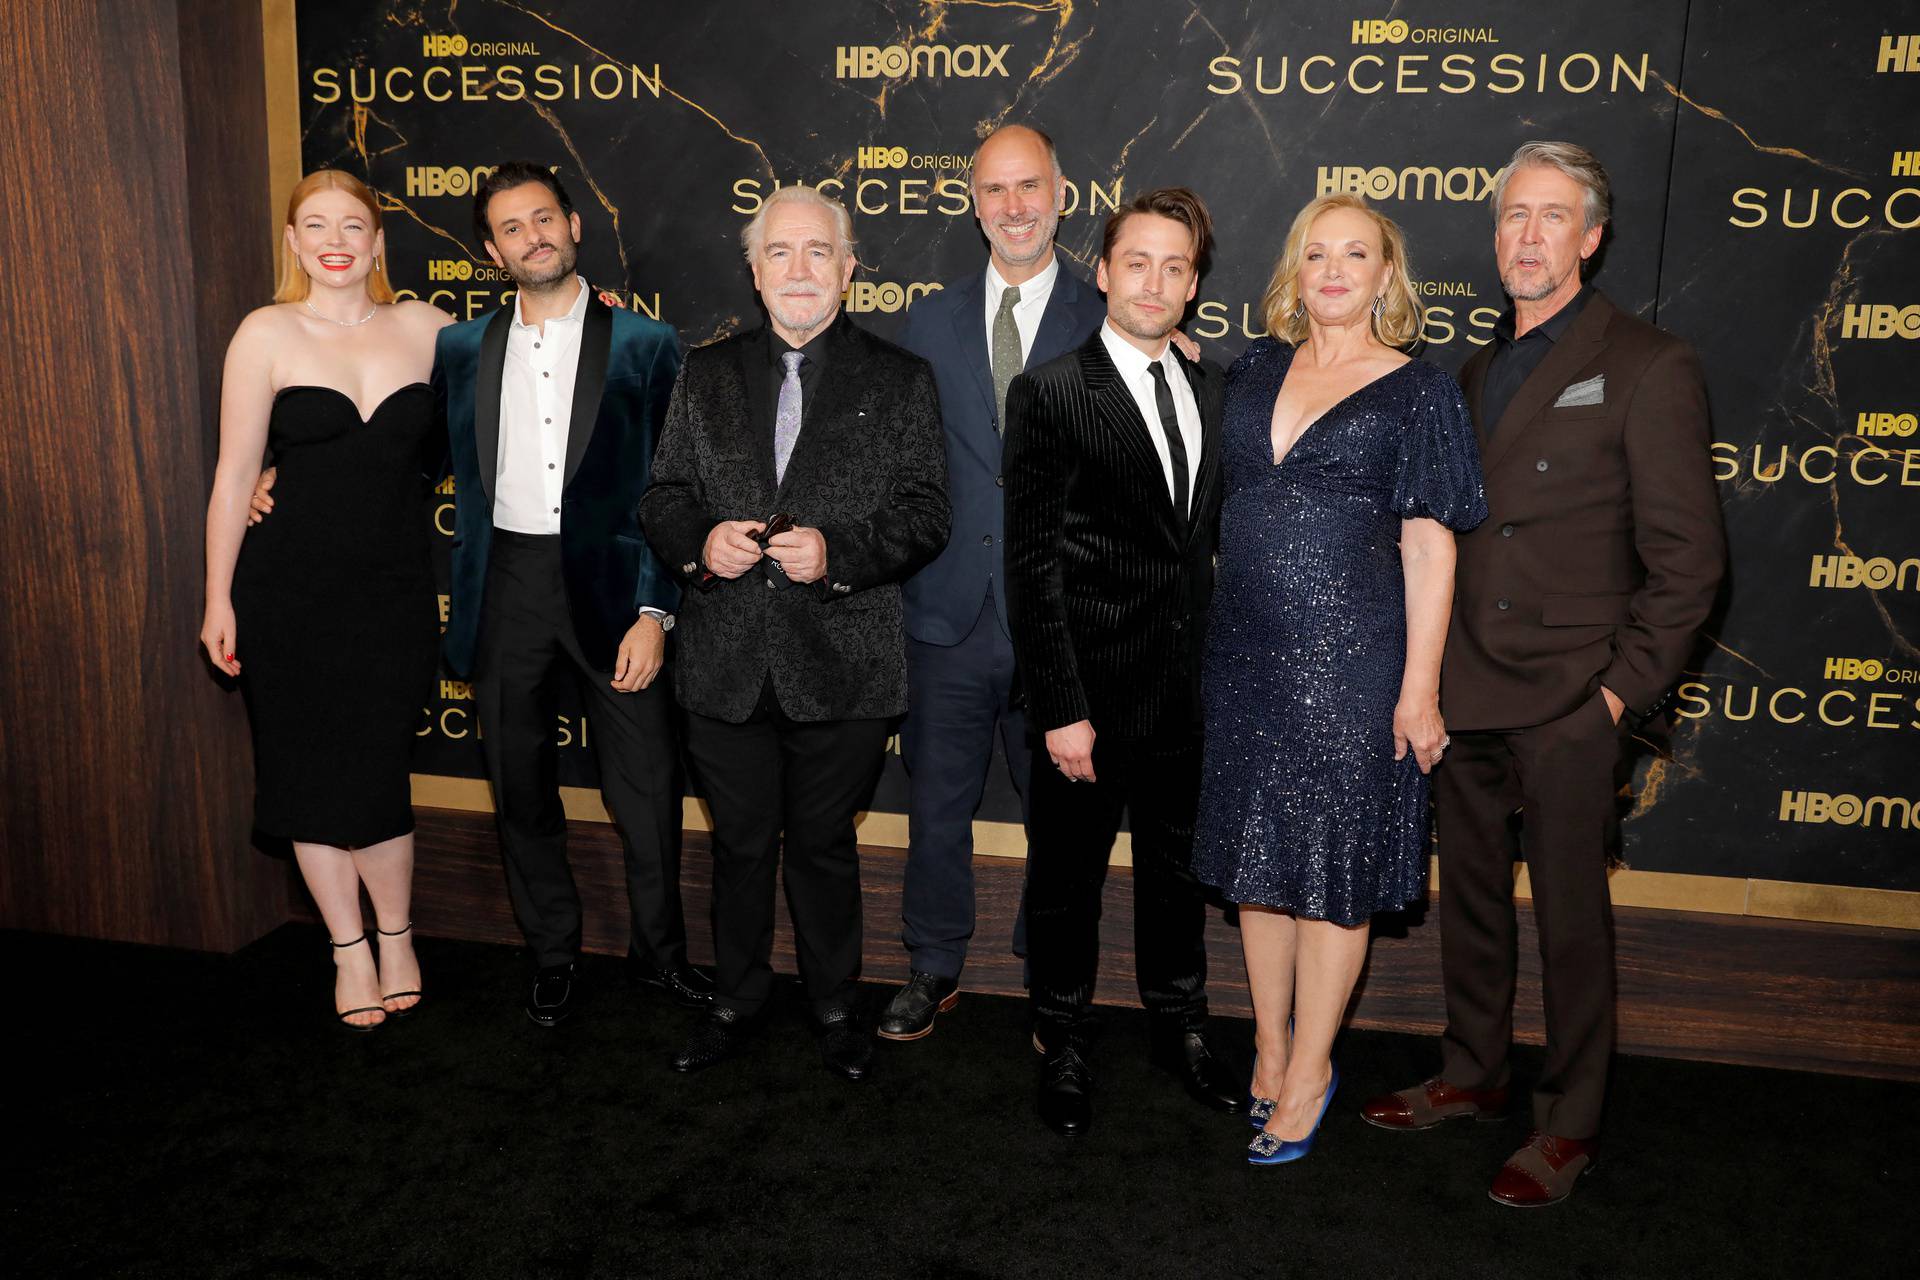 FILE PHOTO: Sarah Snook, Arian Moayed, Brian Cox, Jesse Armstrong, Kieran Culkin, J. Smith-Cameron and Alan Ruck pose while attending the premiere of the third season of "Succession" in Manhattan, New York